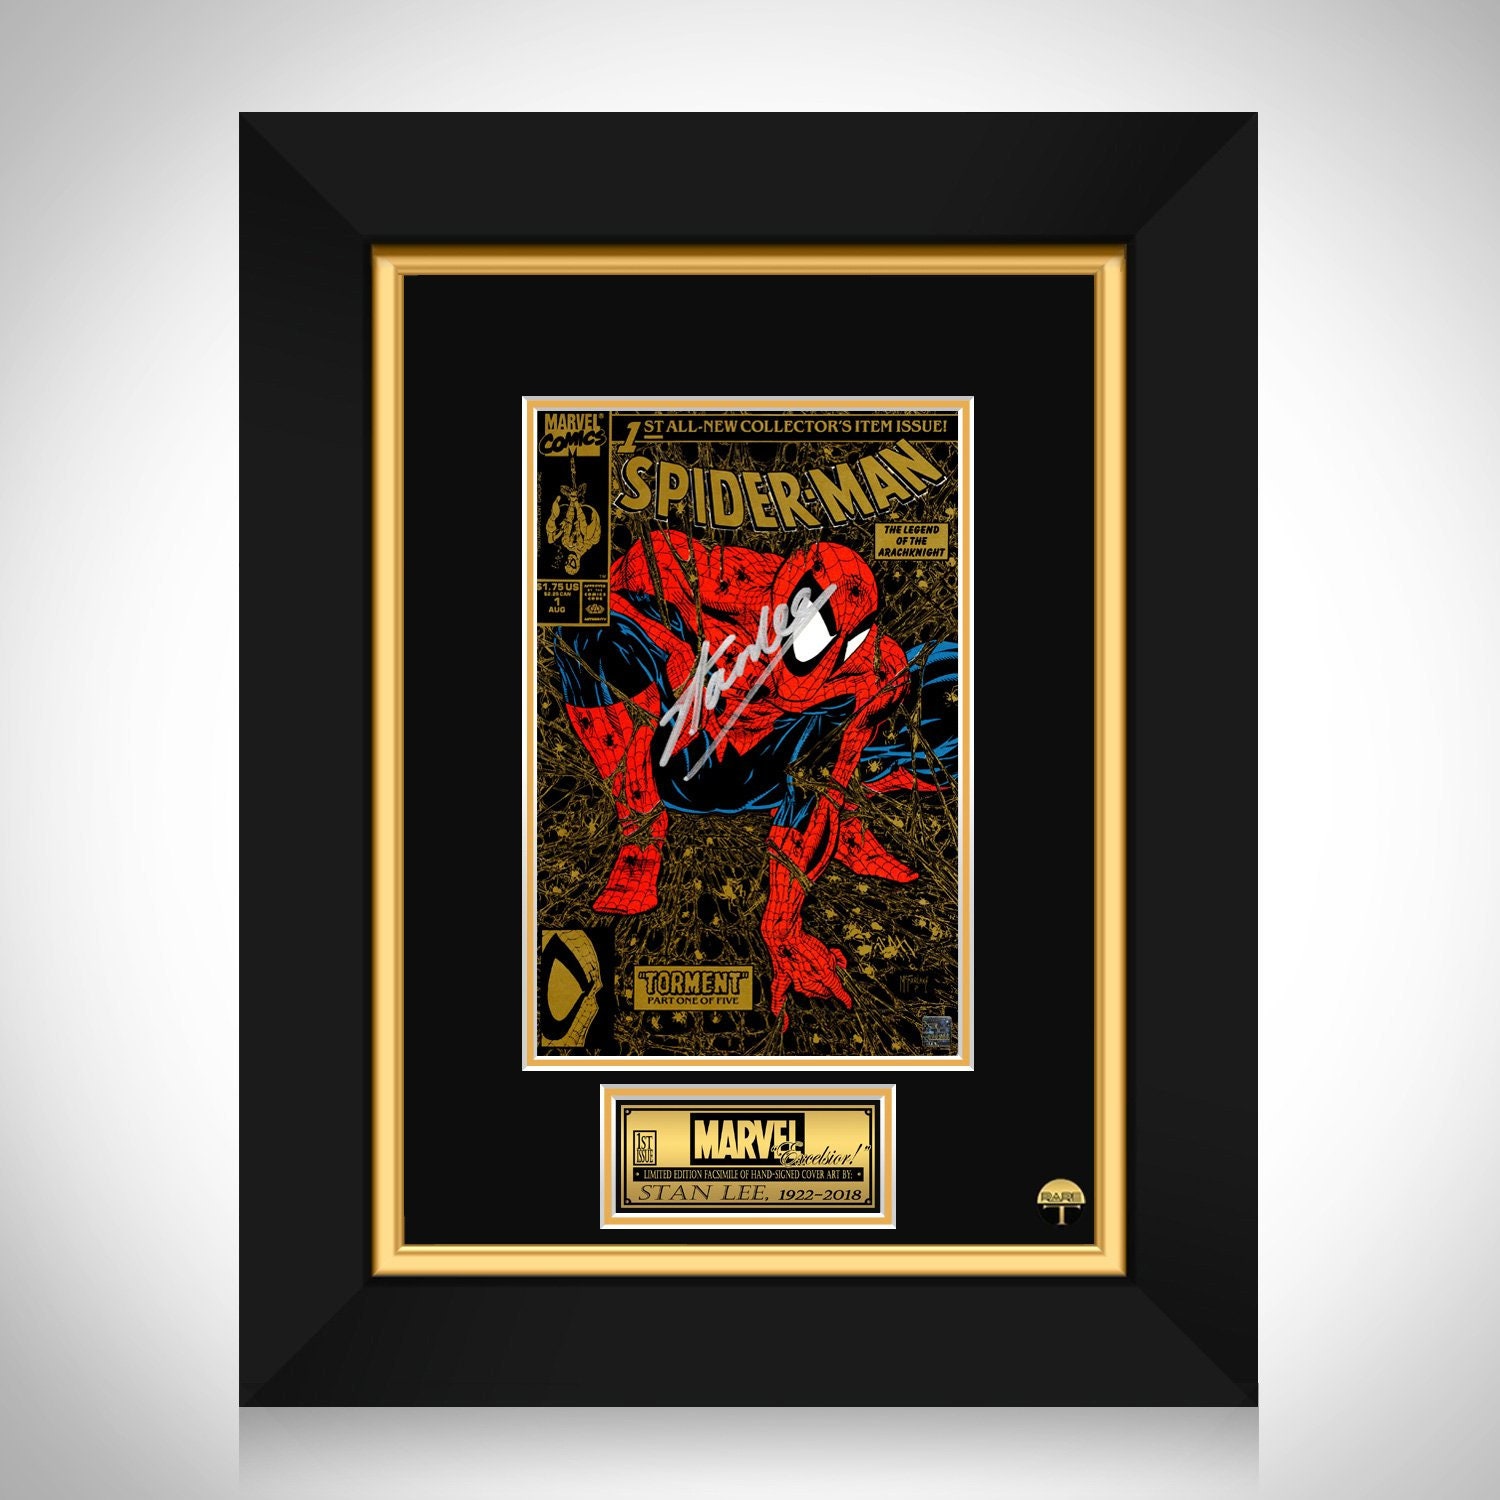 Spidey and His Amazing Friends - Framed Marvel Poster (Spider-Man) (Shiny Copper Aluminum Frame), Size: Frame 25 x 37, Bronze